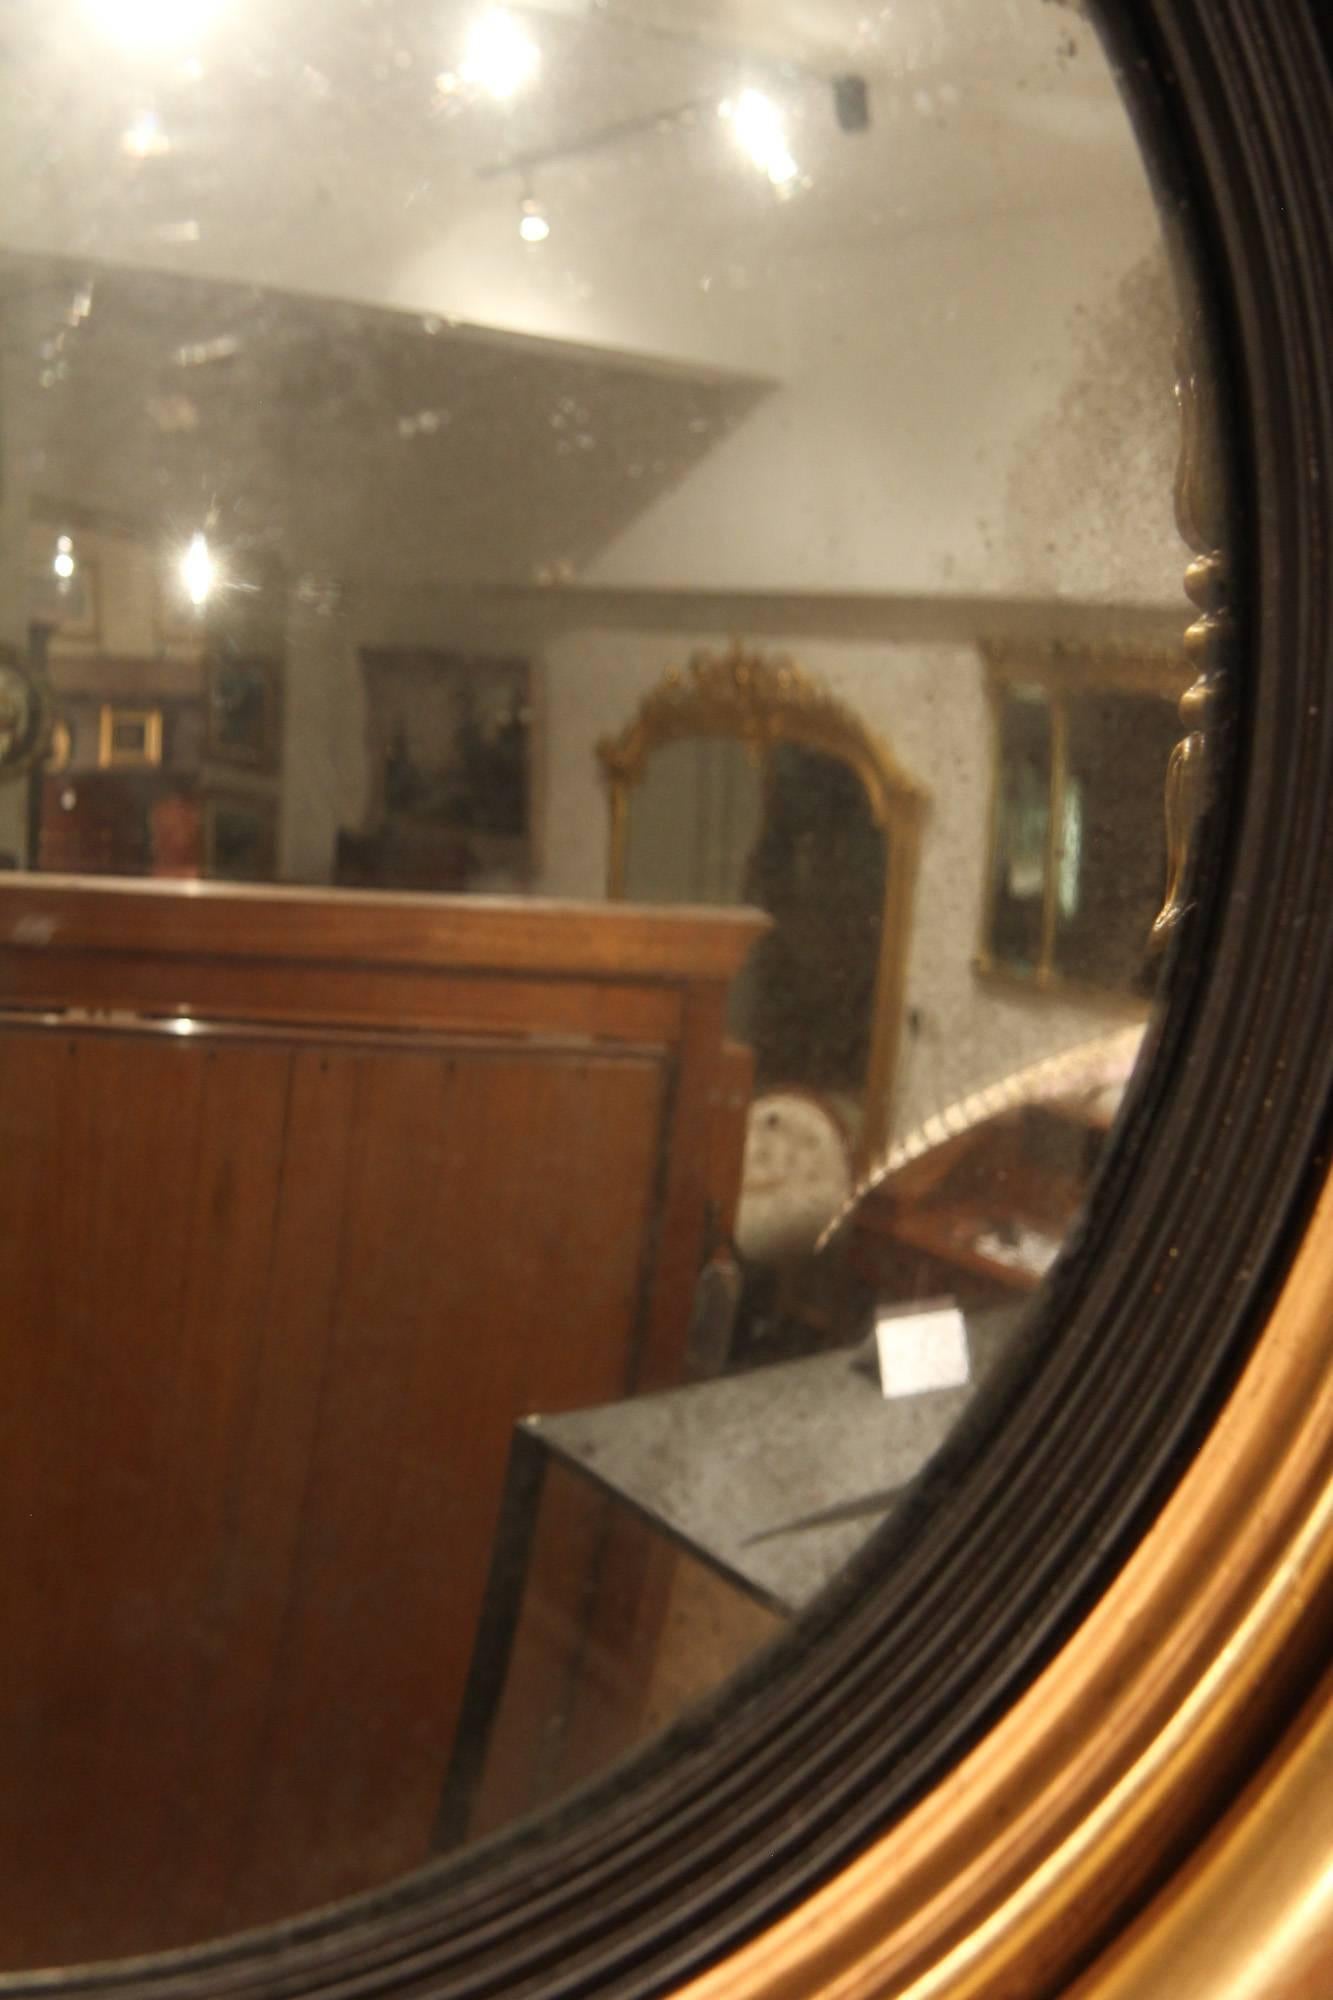 Regency convex butlers mirror, re-gilded, circa 1825.

All of the items that we advertise for sale have been as accurately described as possible and are in excellent condition, unless otherwise stated. Please note that we are also able to arrange